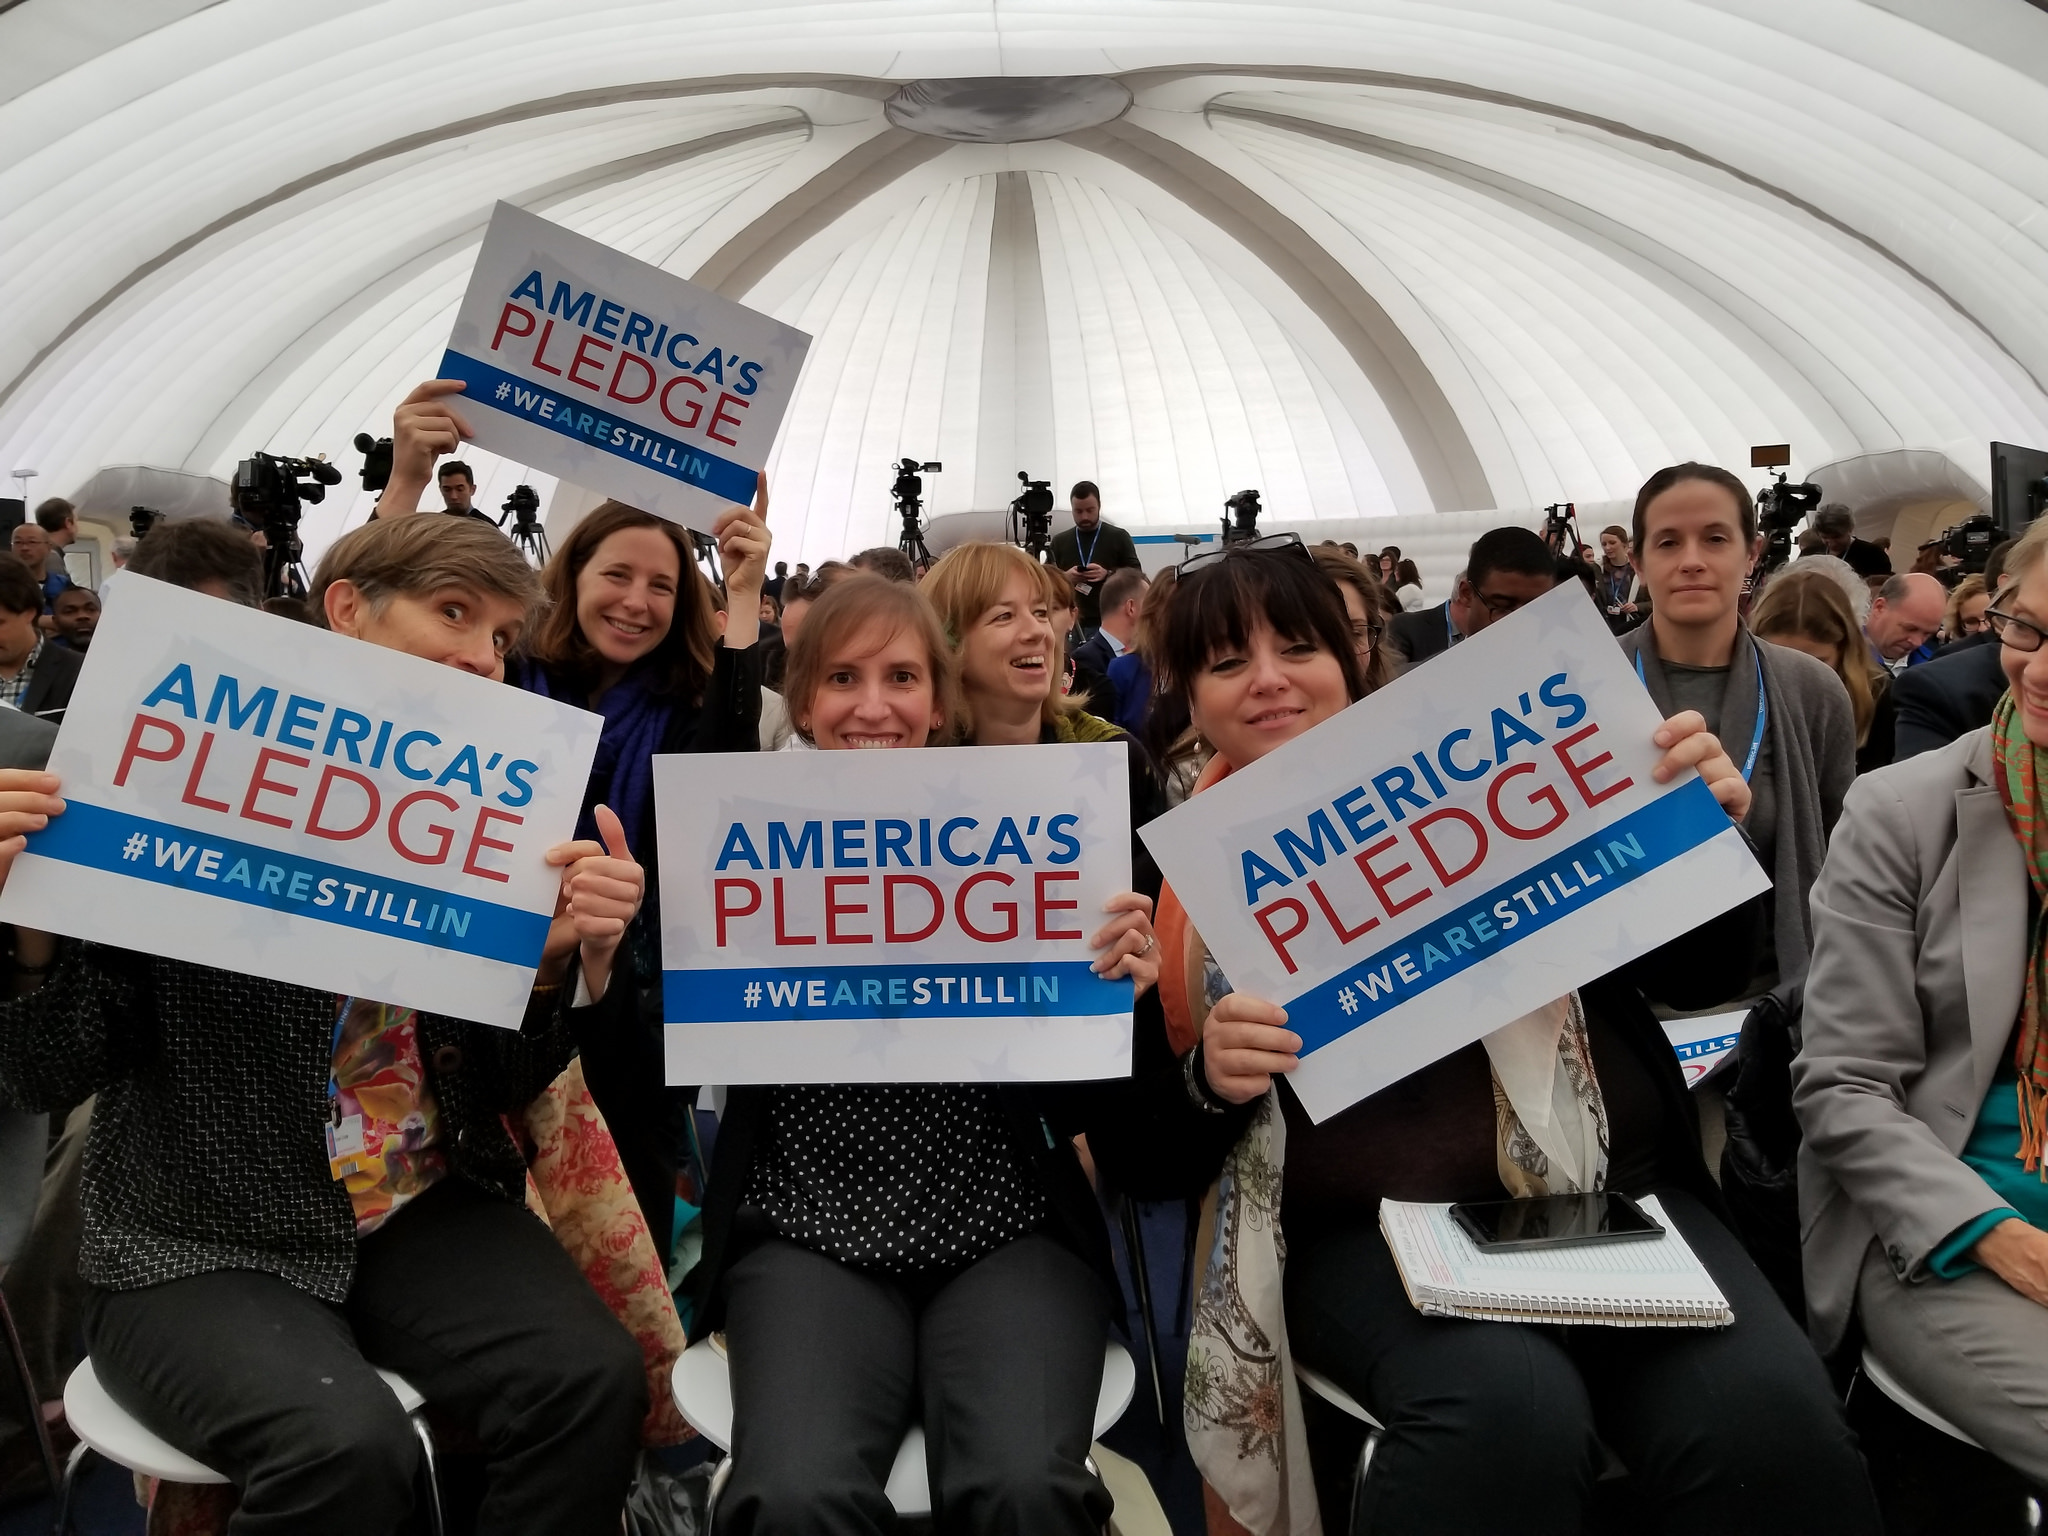 <p>At an event where America\'s Pledge was announced. Flickr/WRI</p>
